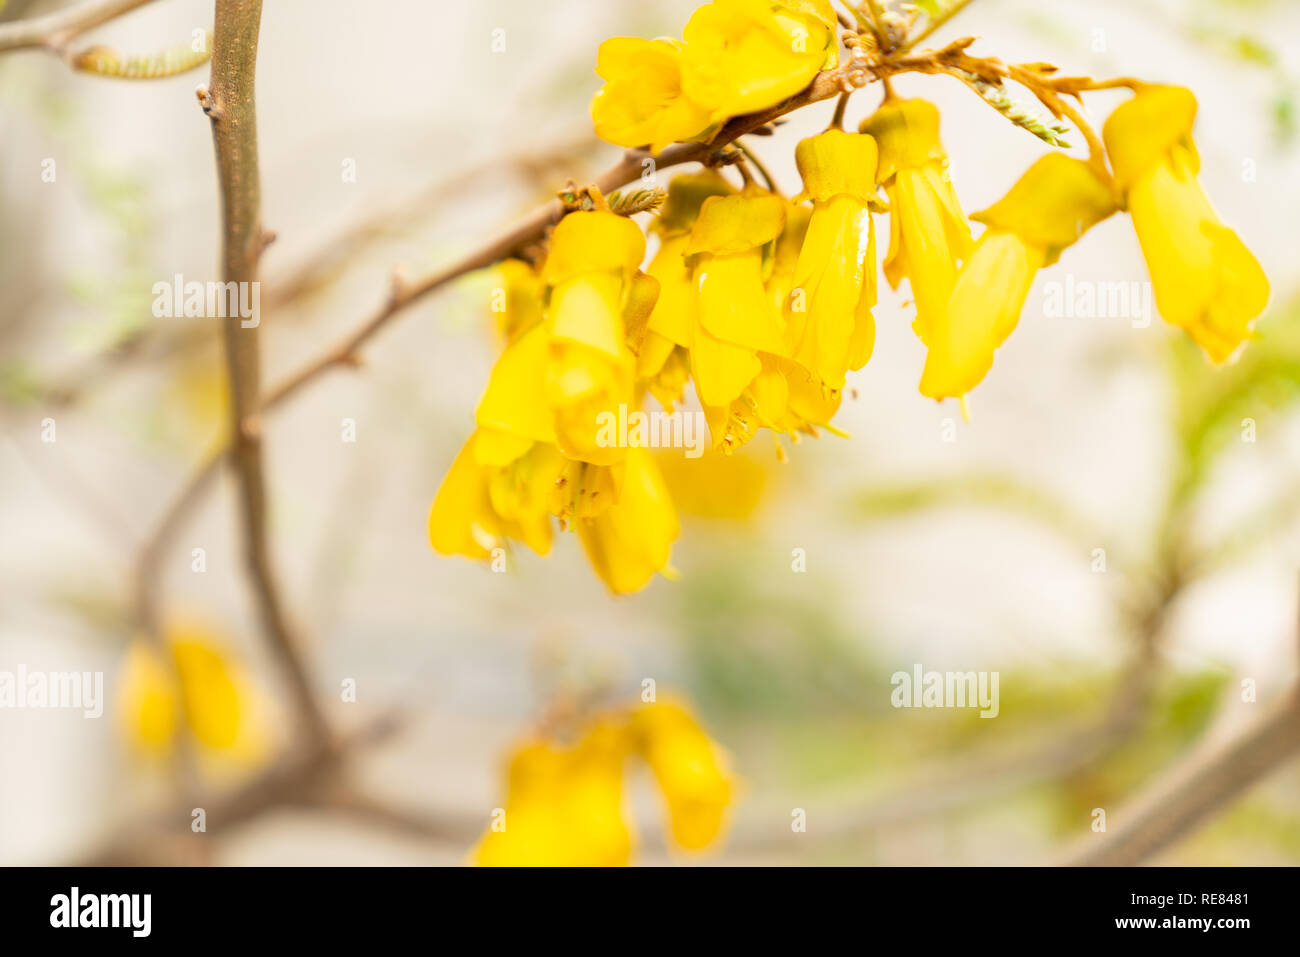 Bright yellow kowhai flowers close-up in selective focus. Stock Photo